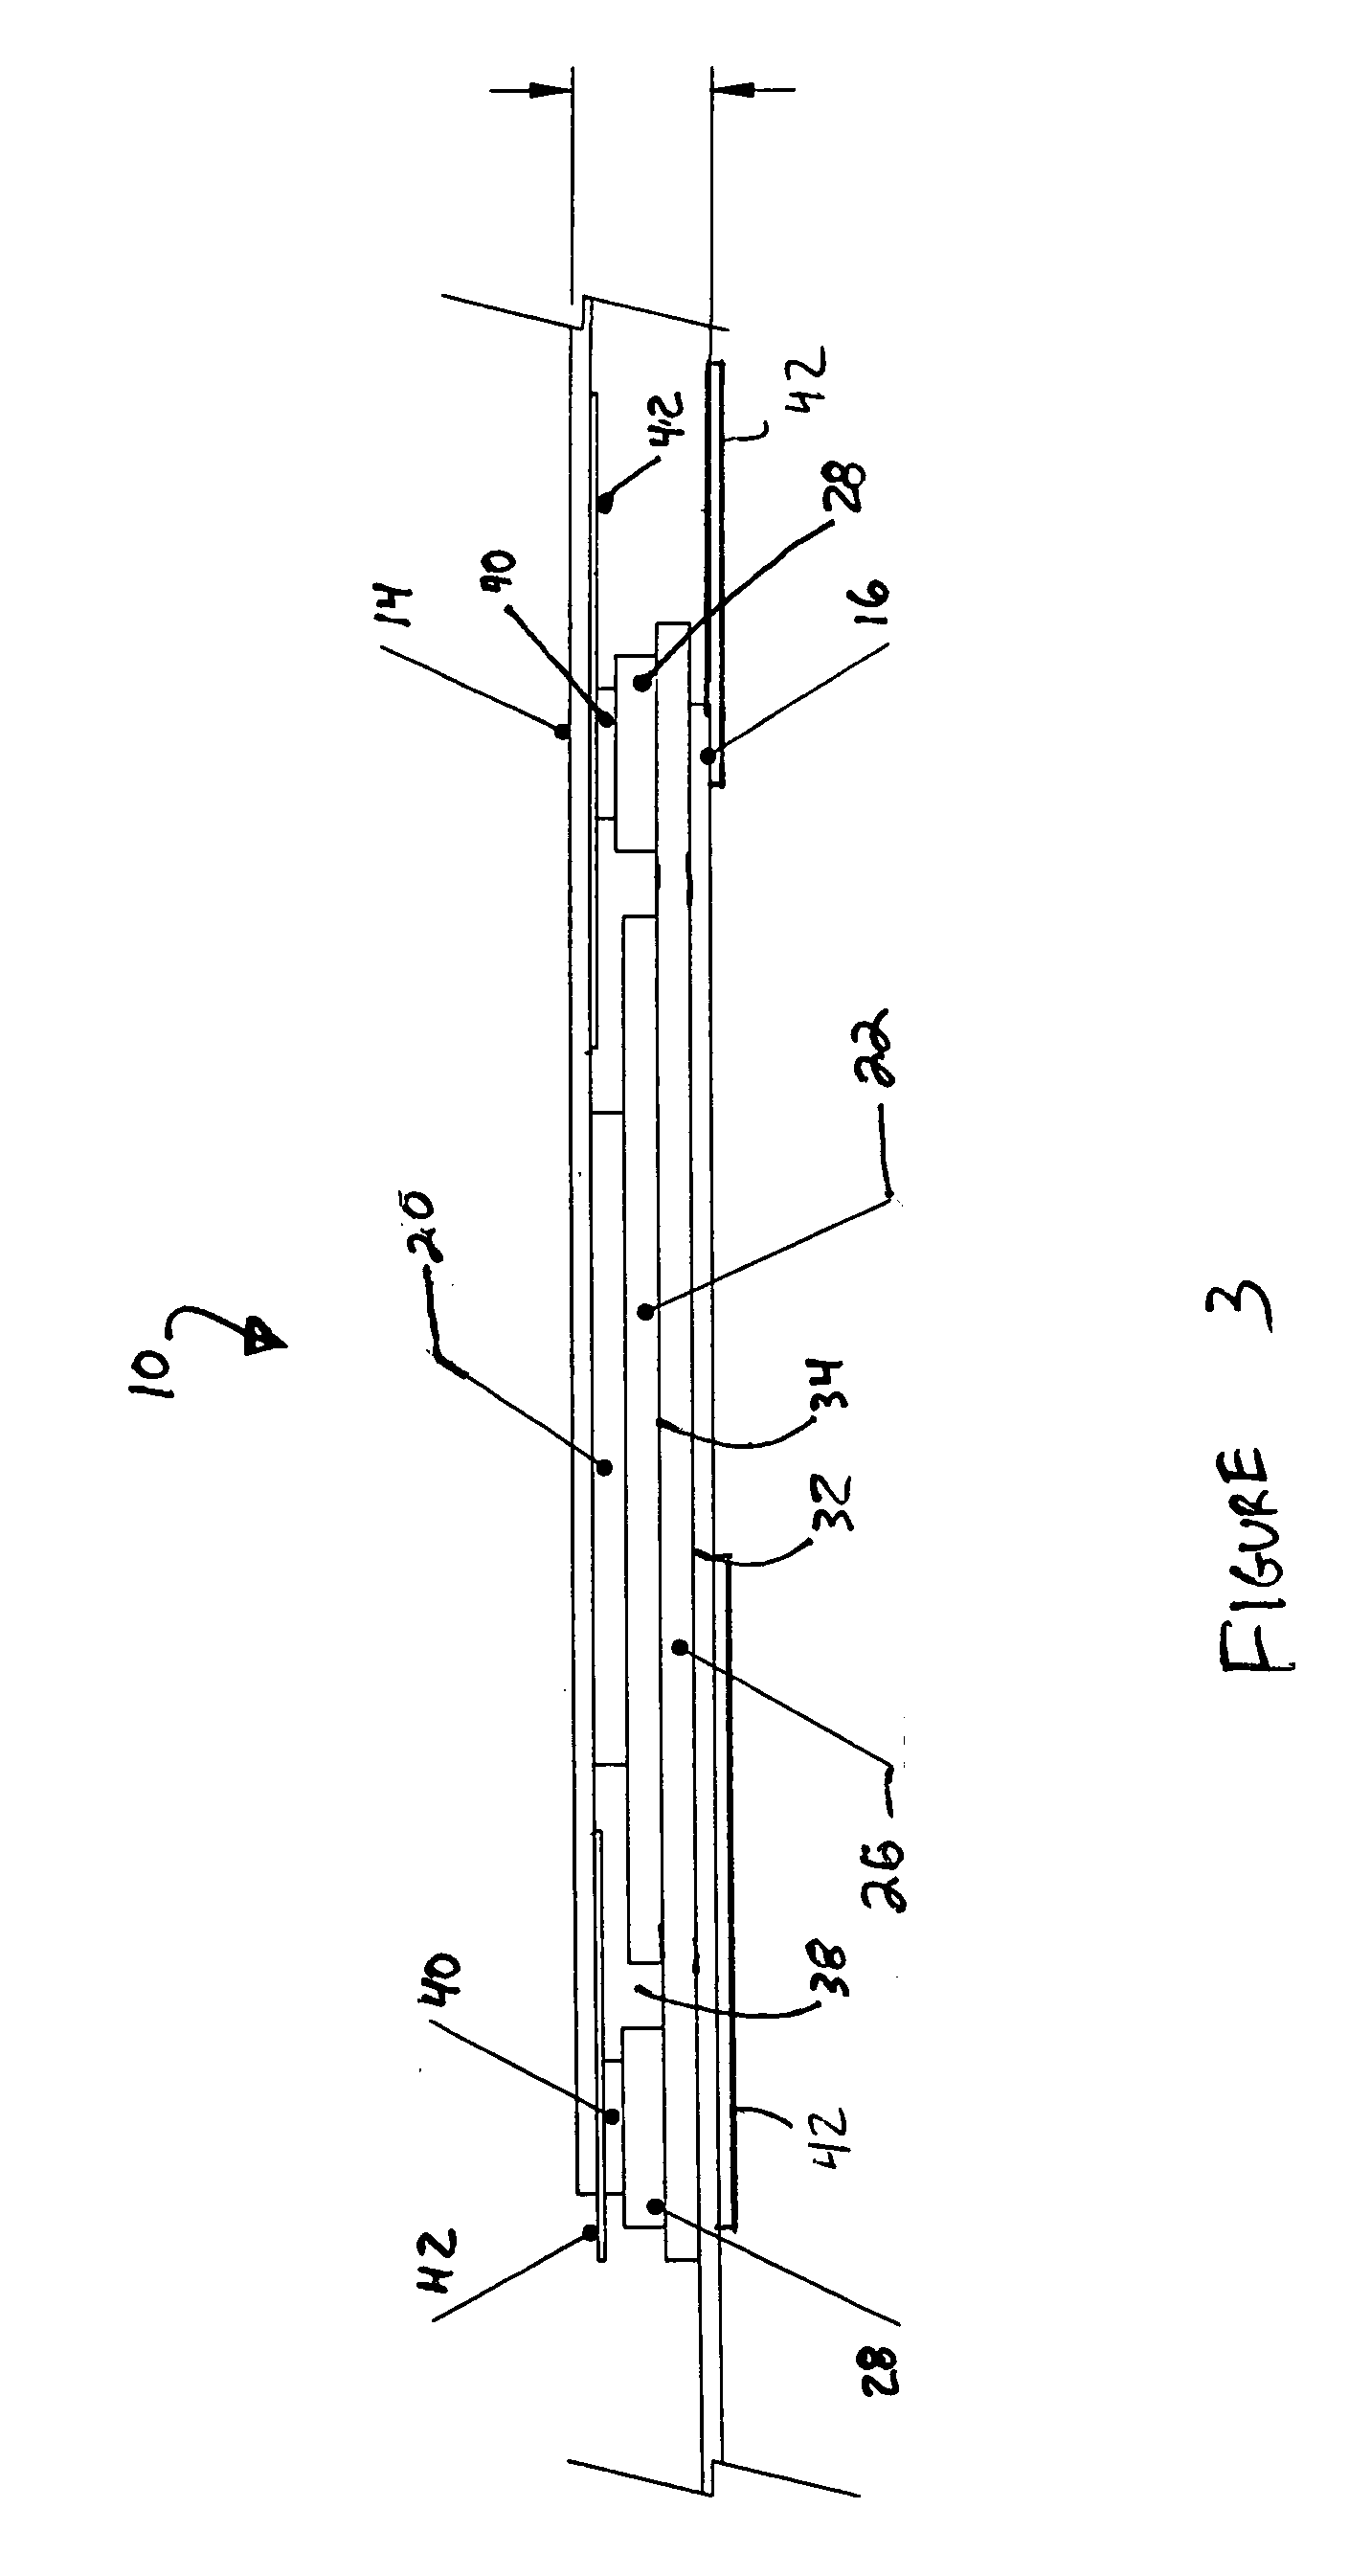 Integrated circuit with flexible planer leads